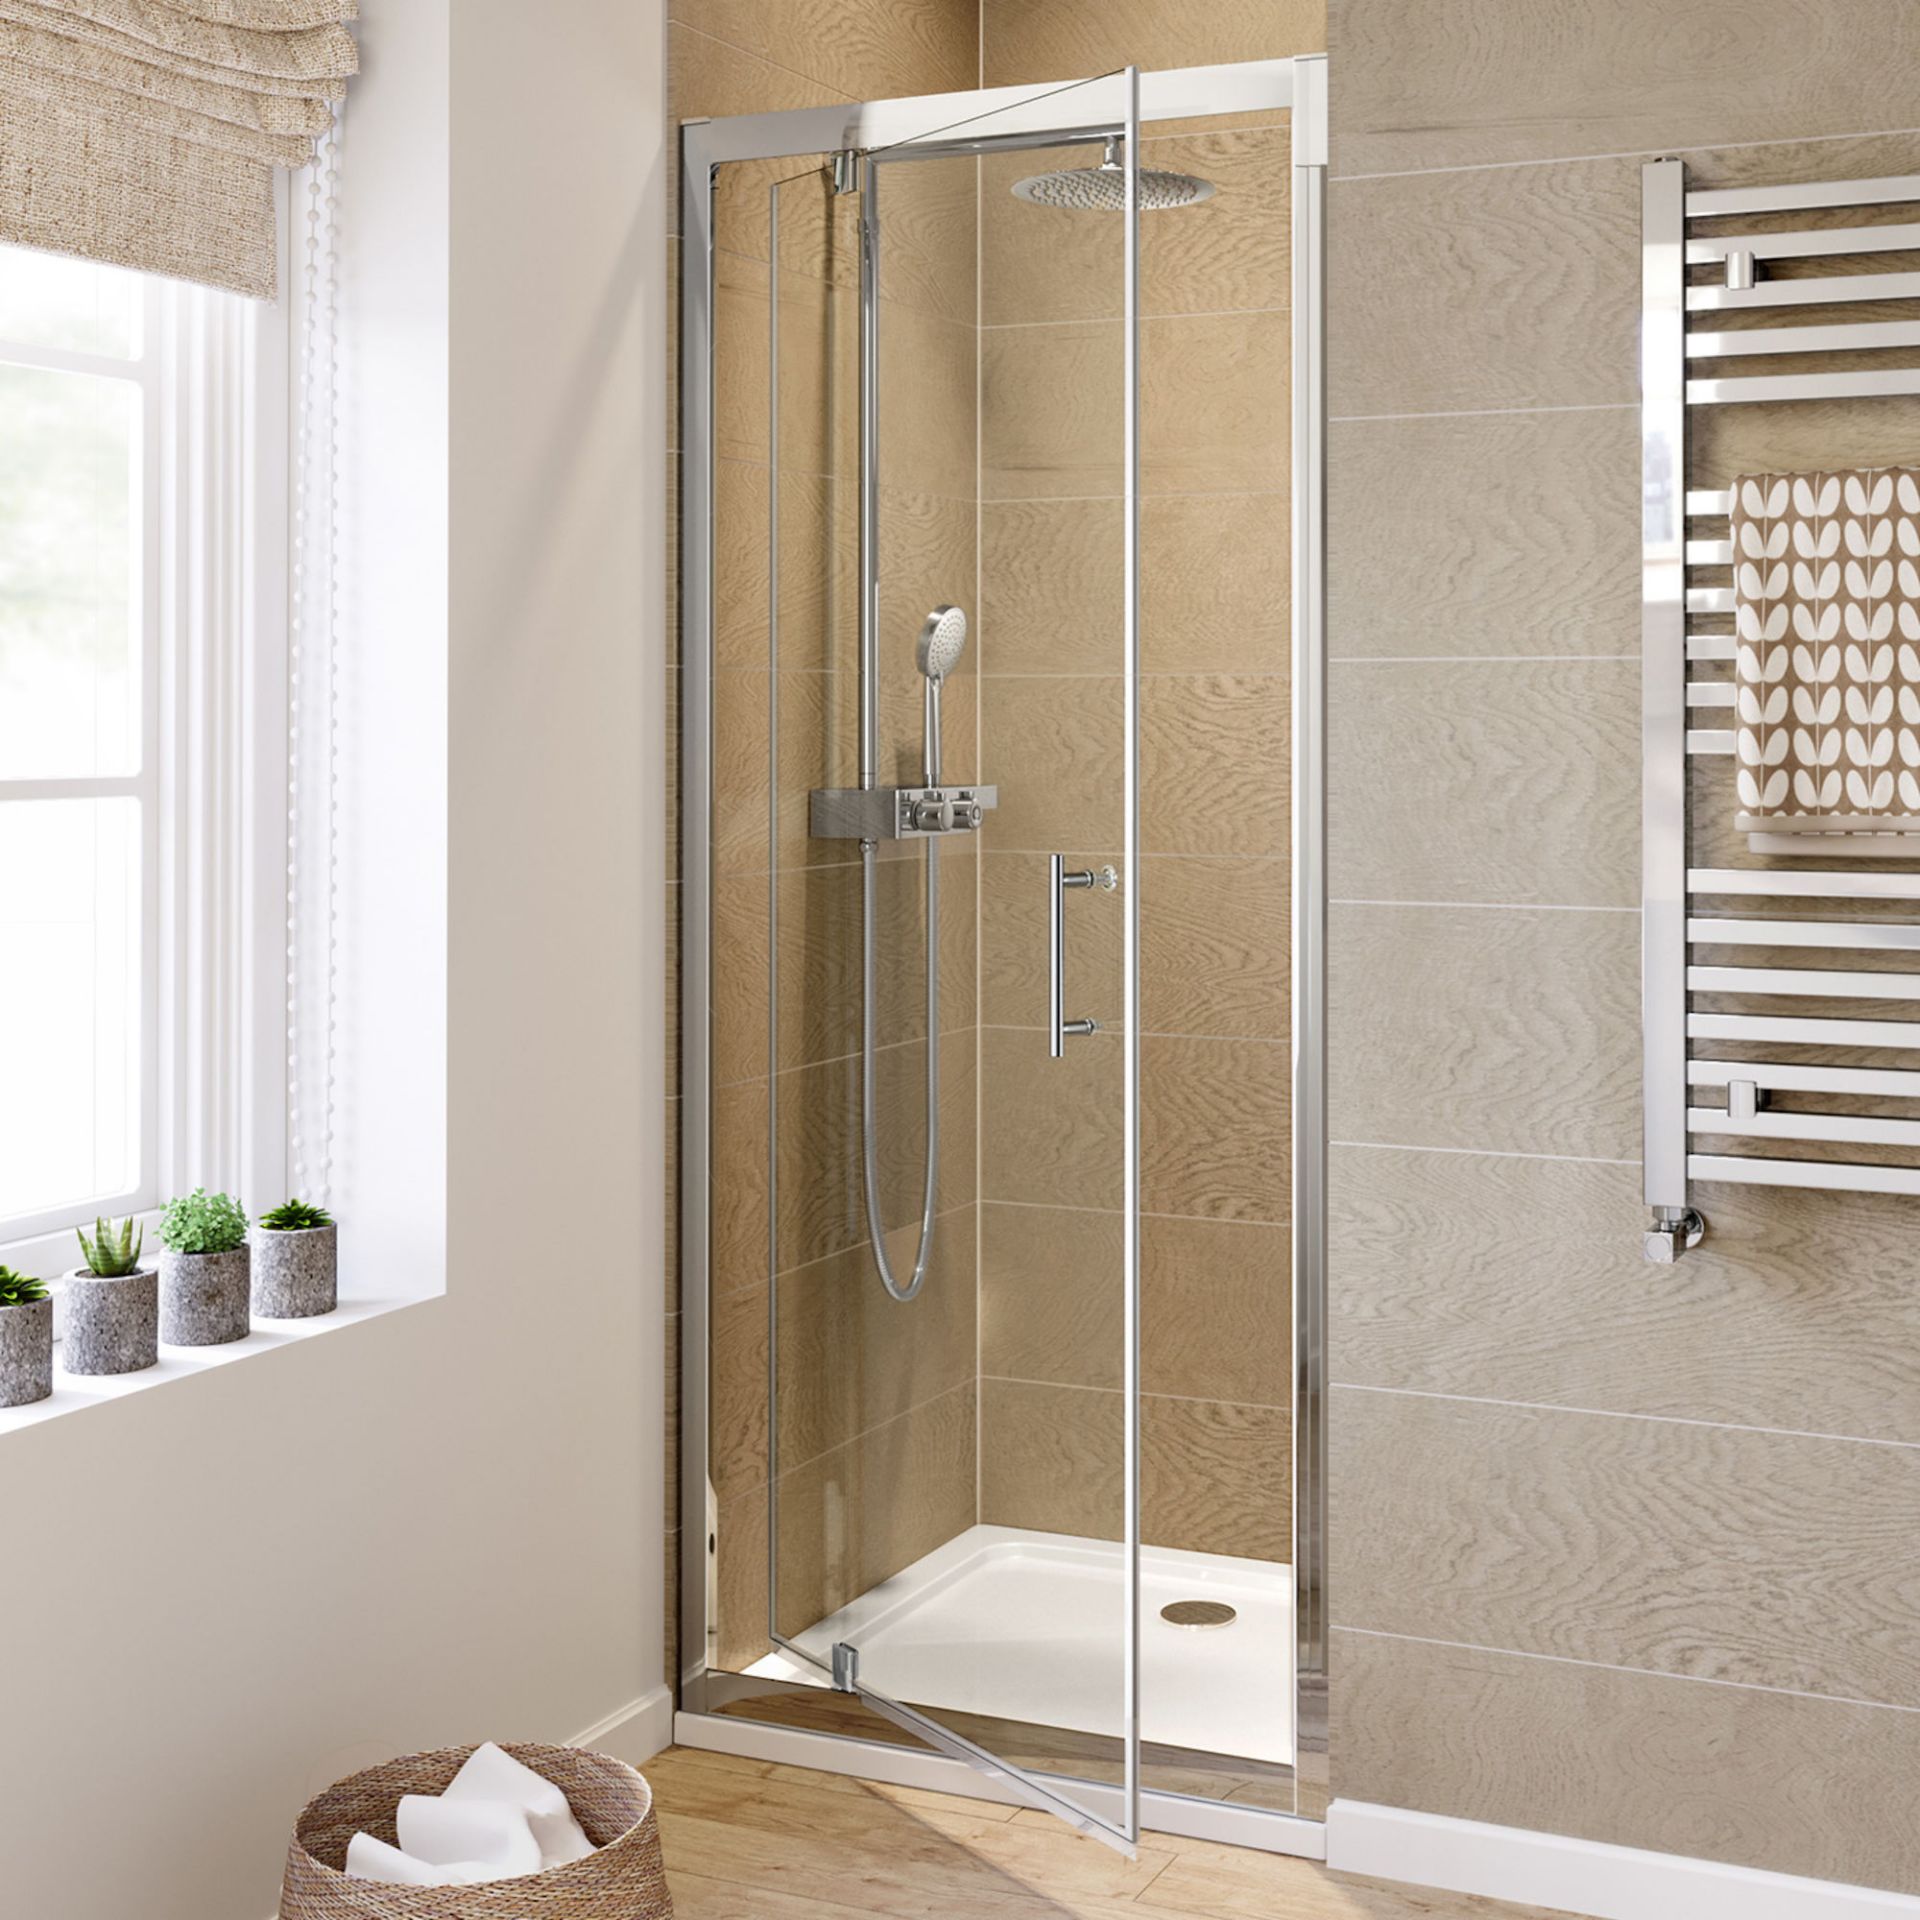 (XM179) 760mm - 6mm - Elements Pivot Shower Door. RRP £299.99. 6mm Safety Glass Fully waterproof